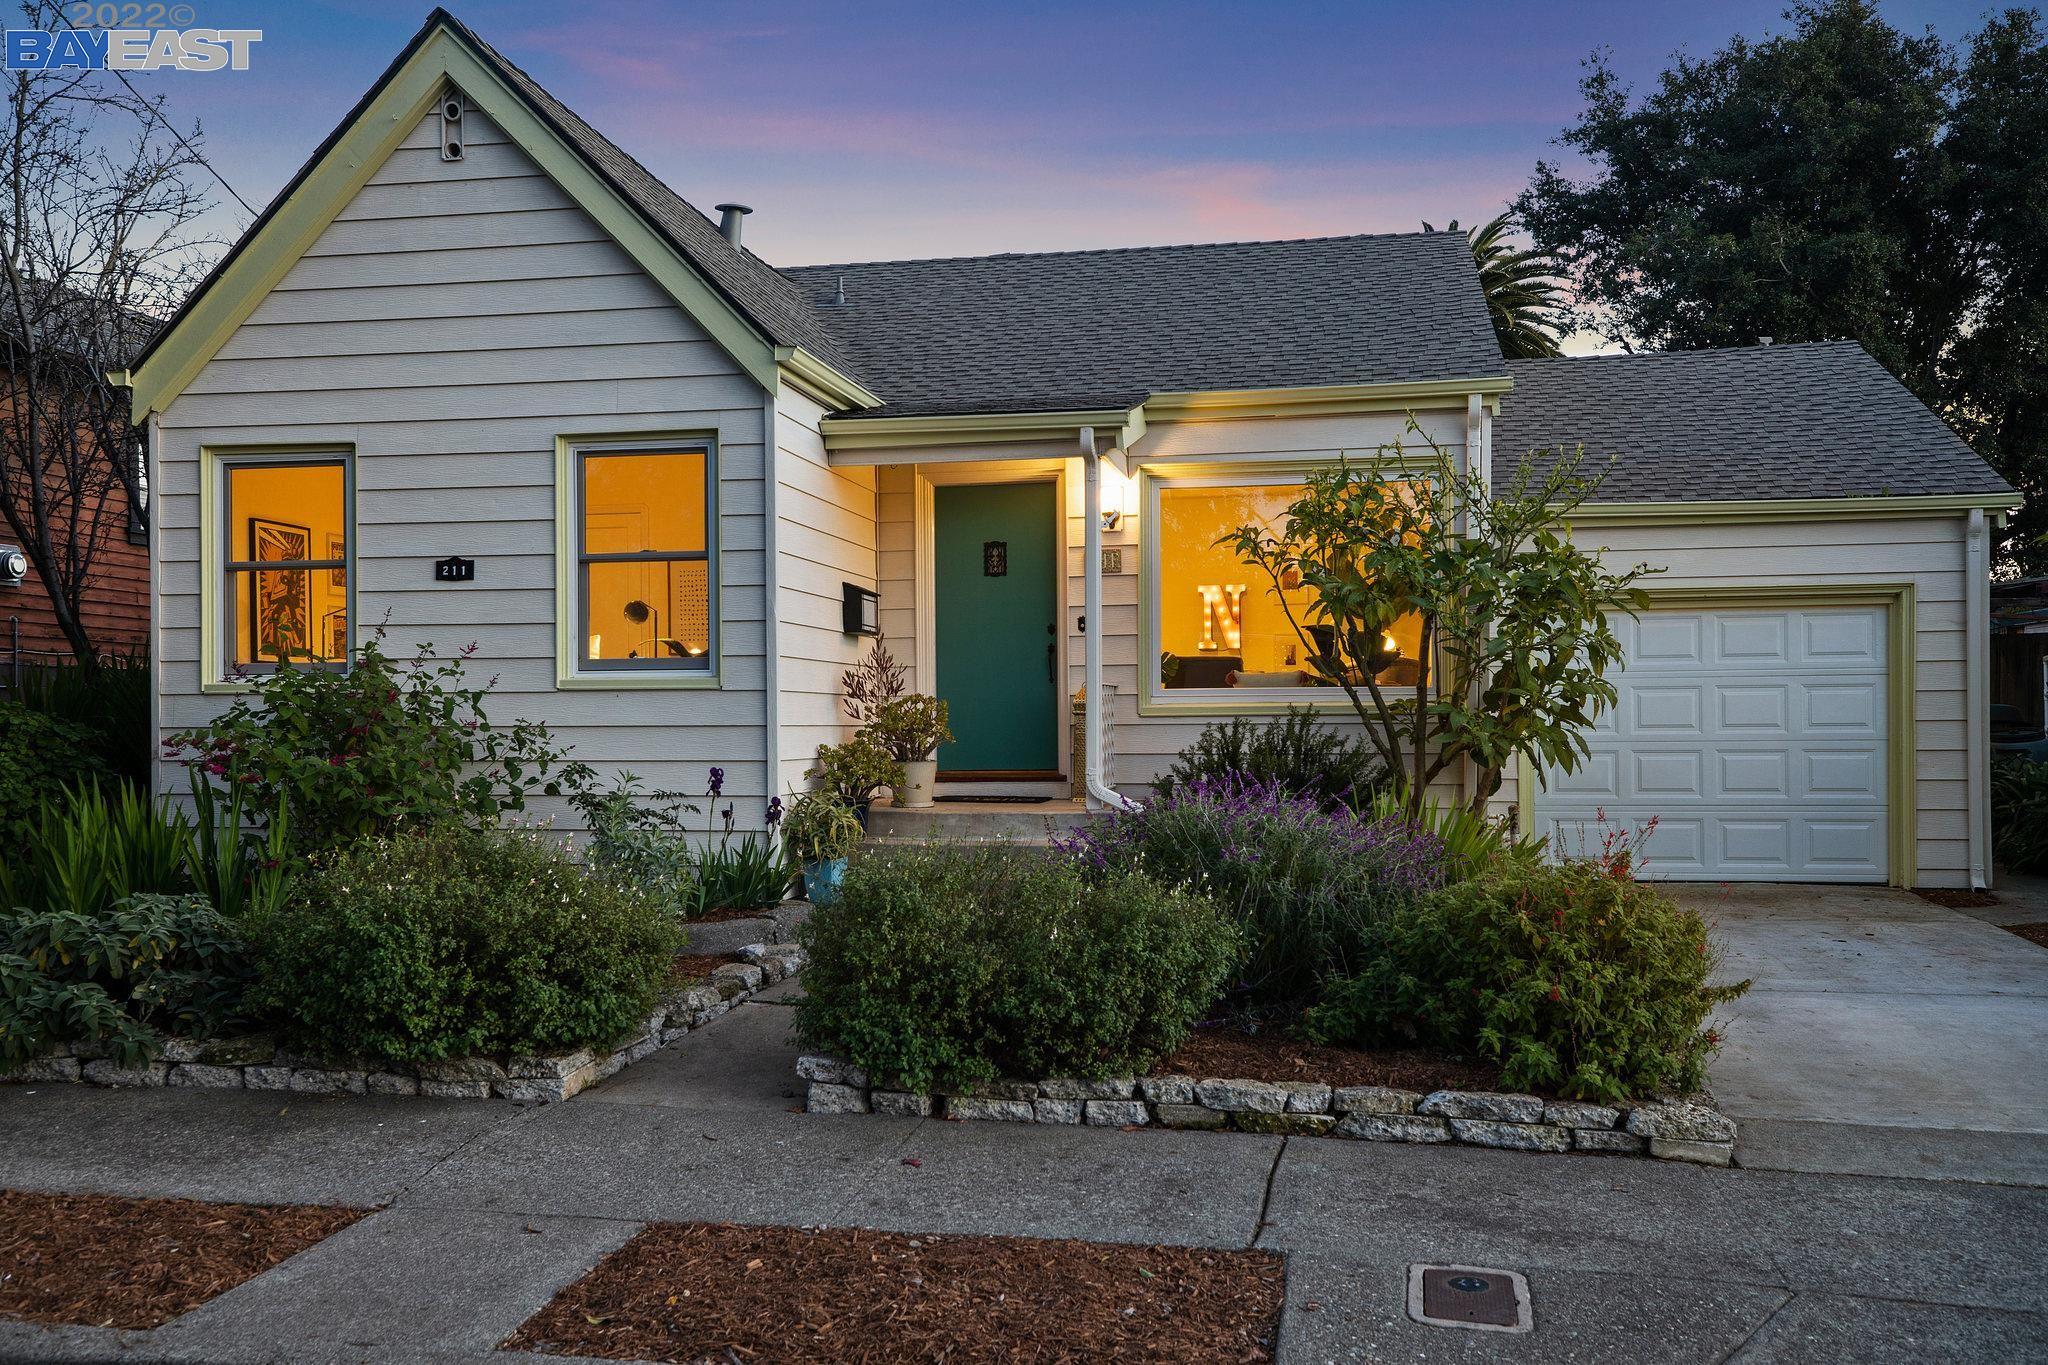 Photo of 211 Campbell Ave in Vallejo, CA